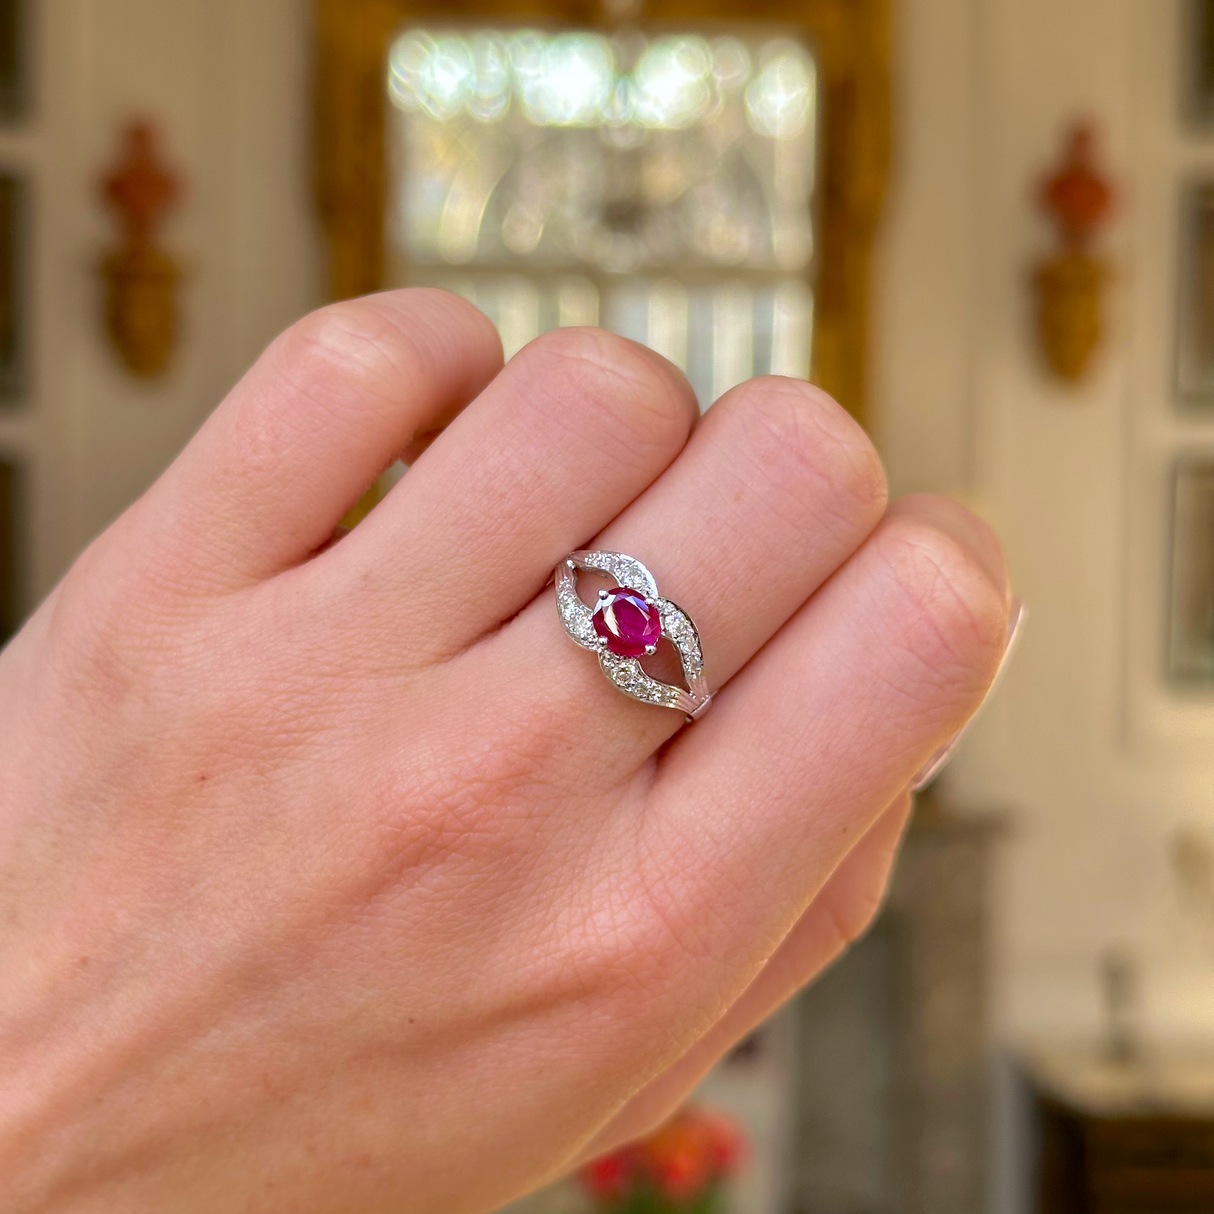 Vintage art deco ruby and diamond ring worn on closed hand. 